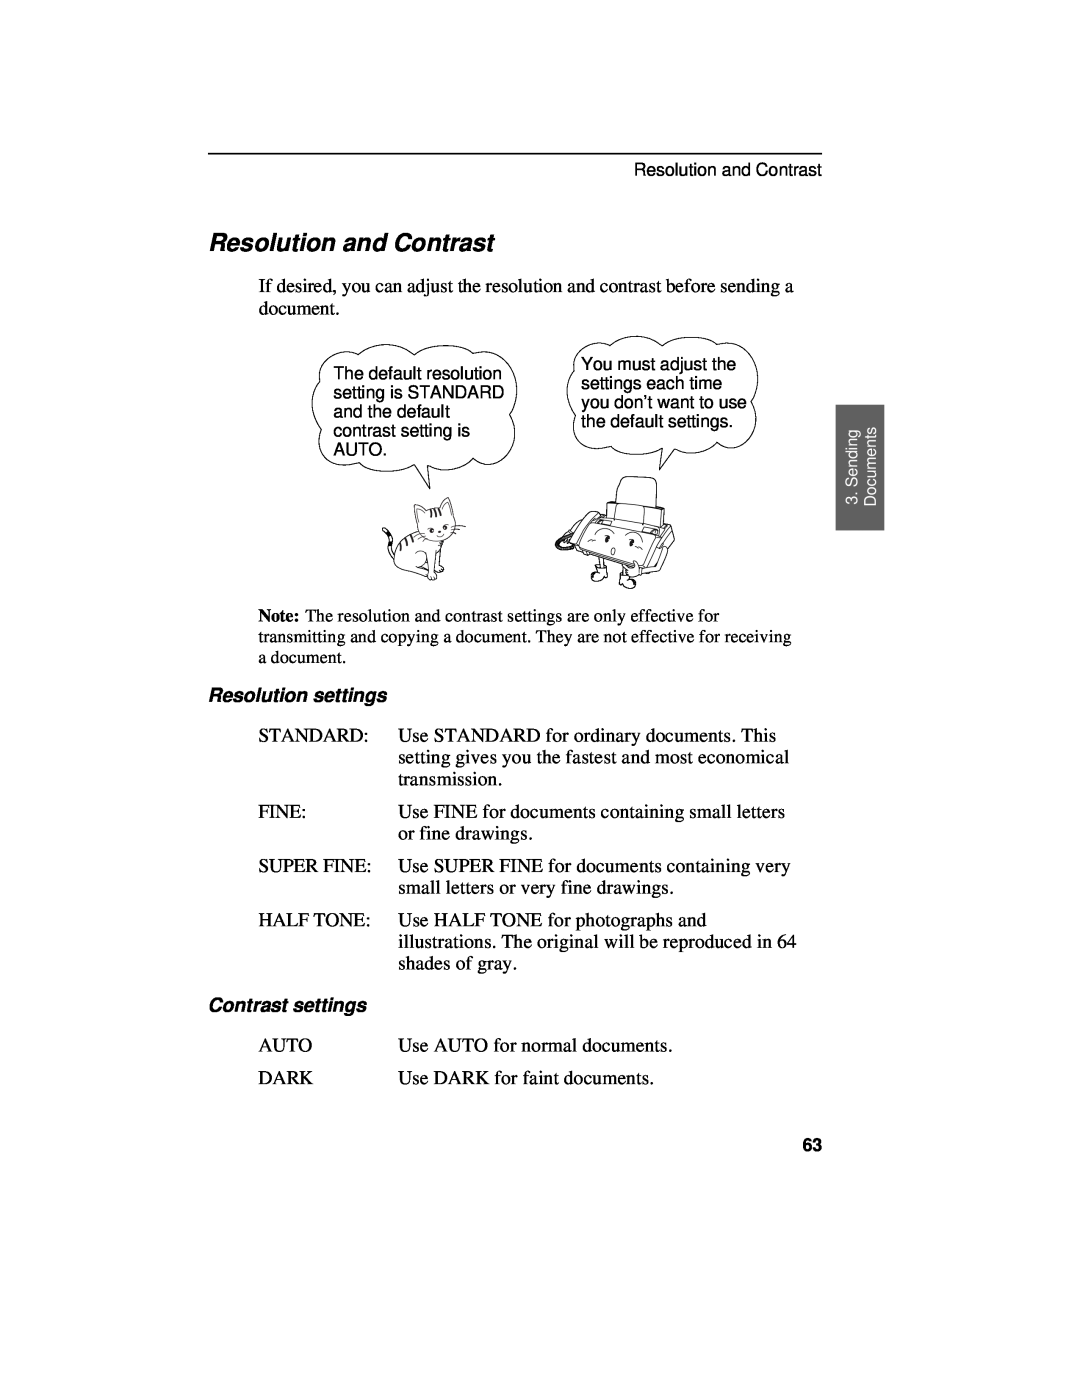 Sharp UX-460 operation manual Resolution and Contrast, Resolution settings, Contrast settings 